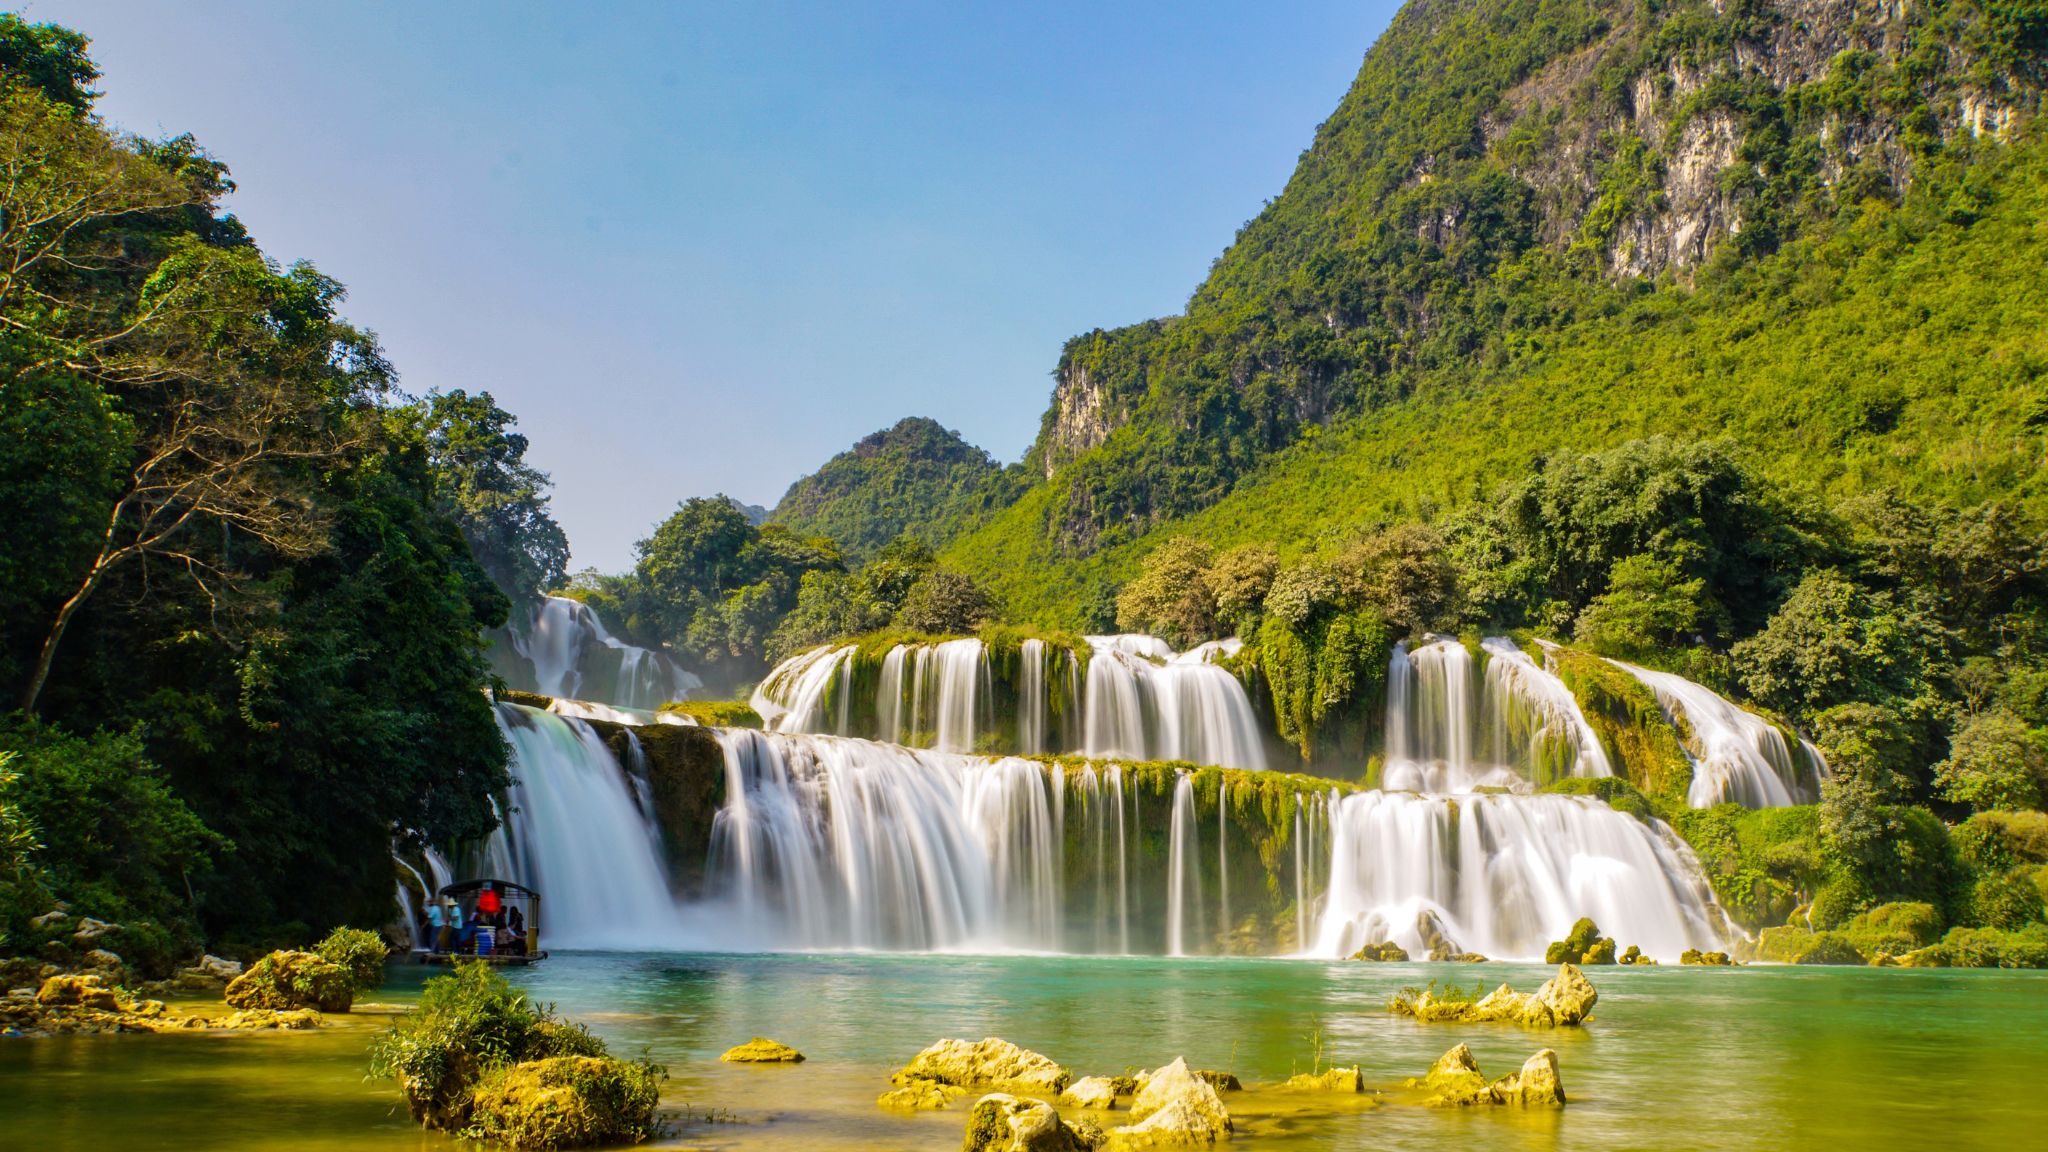 Day 4 Immersed Yourself In The Stunning Ban Gioc Waterfall